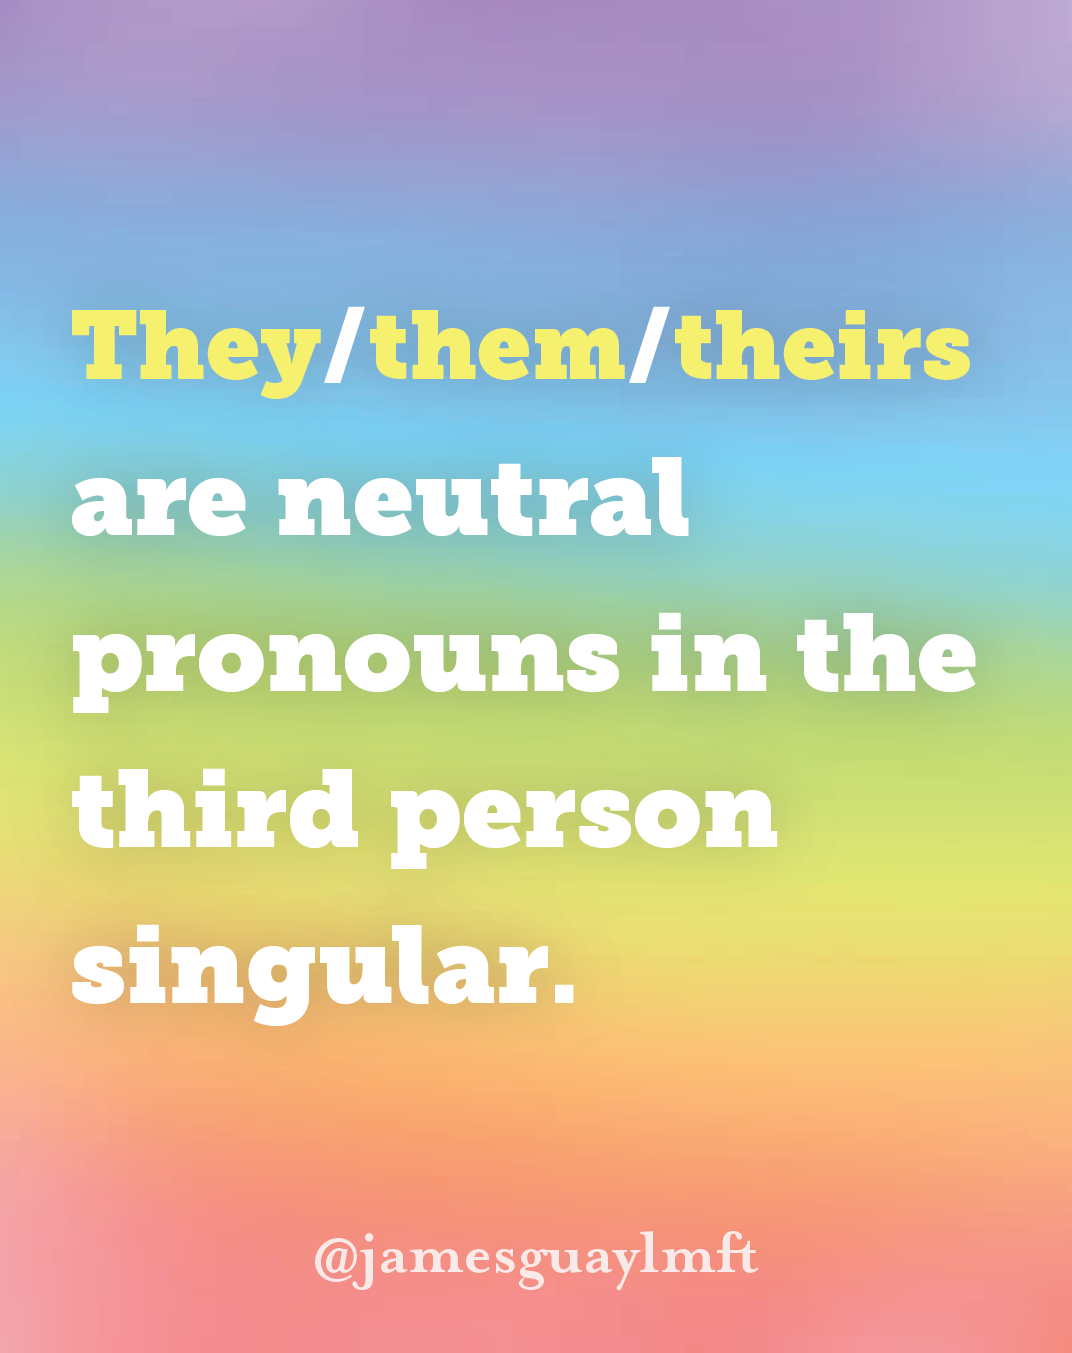 They/them/theirs are neutral pronouns